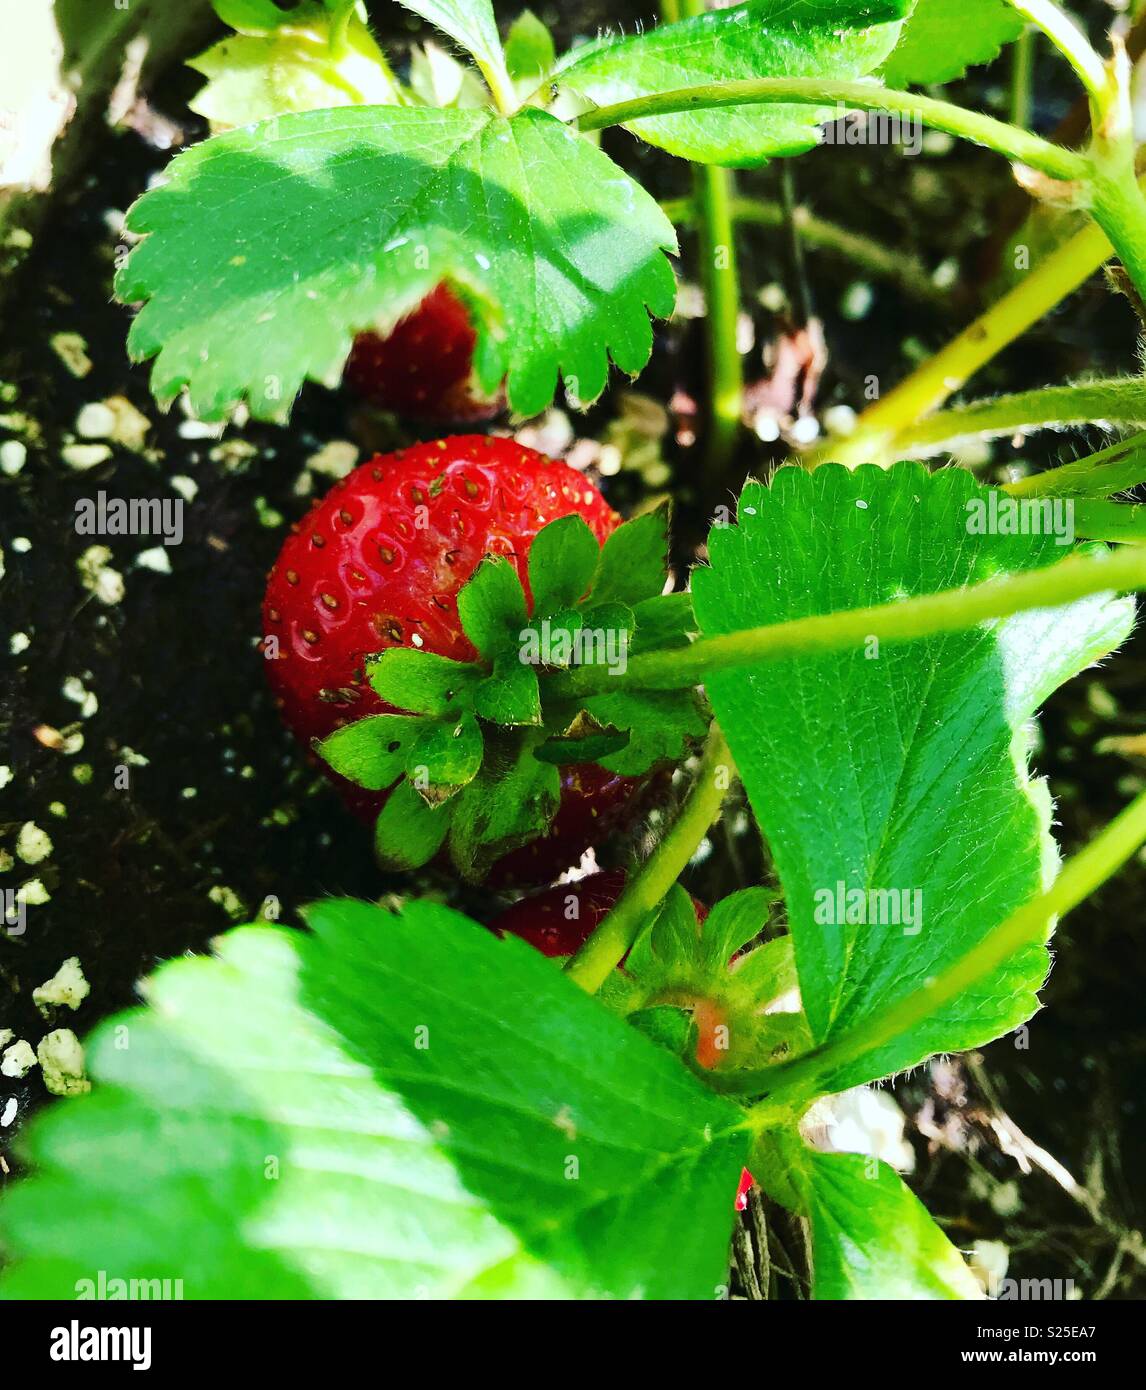 Up close shot of a potted strawberry plant blooming. Green leafs and red berries. Stock Photo